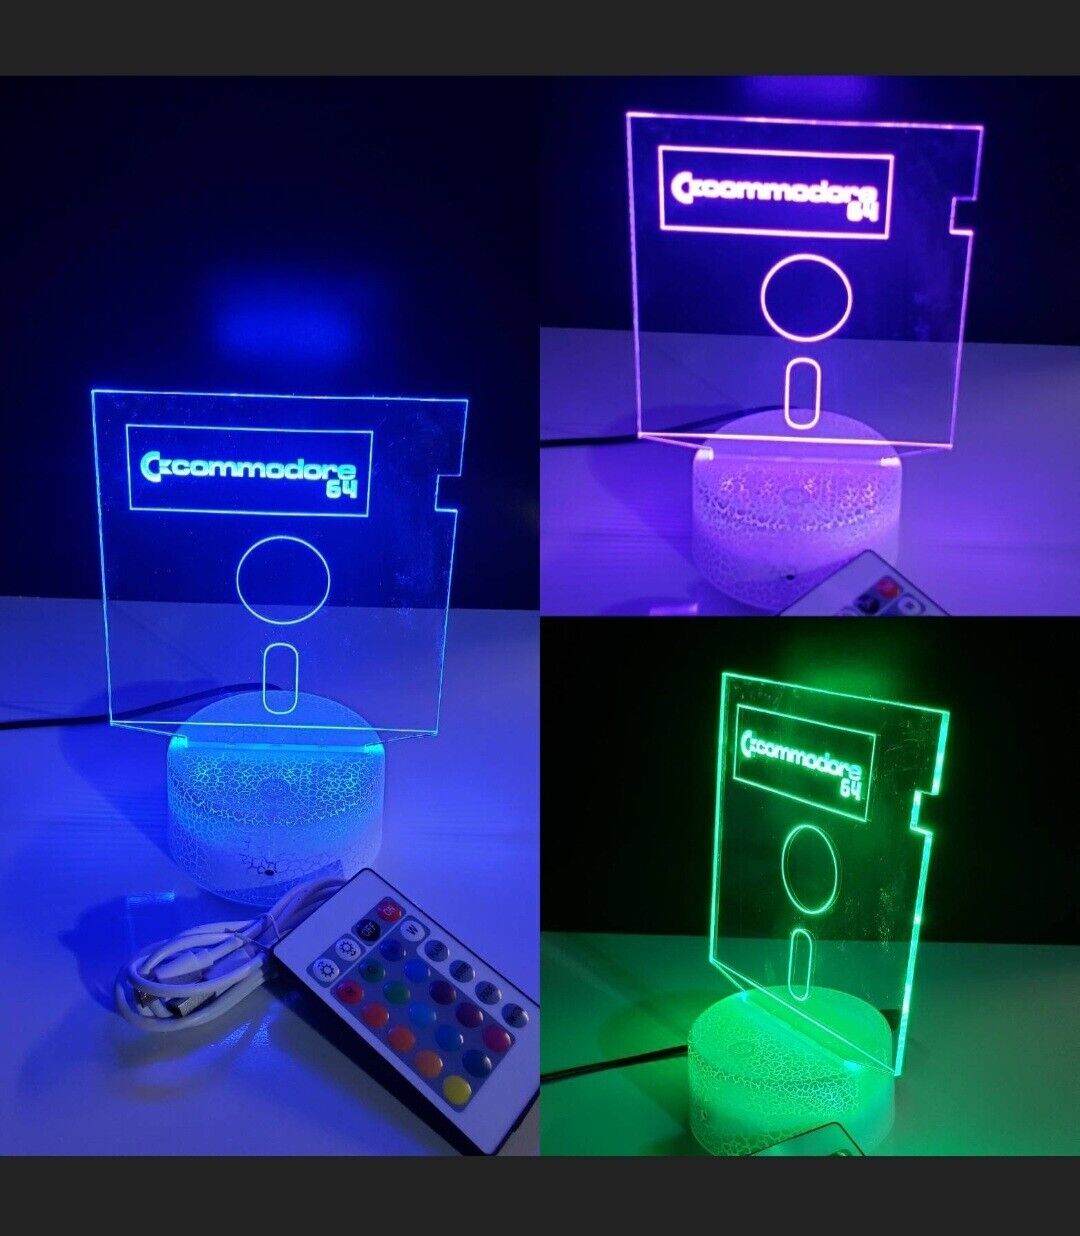 Commodore 64 led lamp displays 8 different colors (show it off)